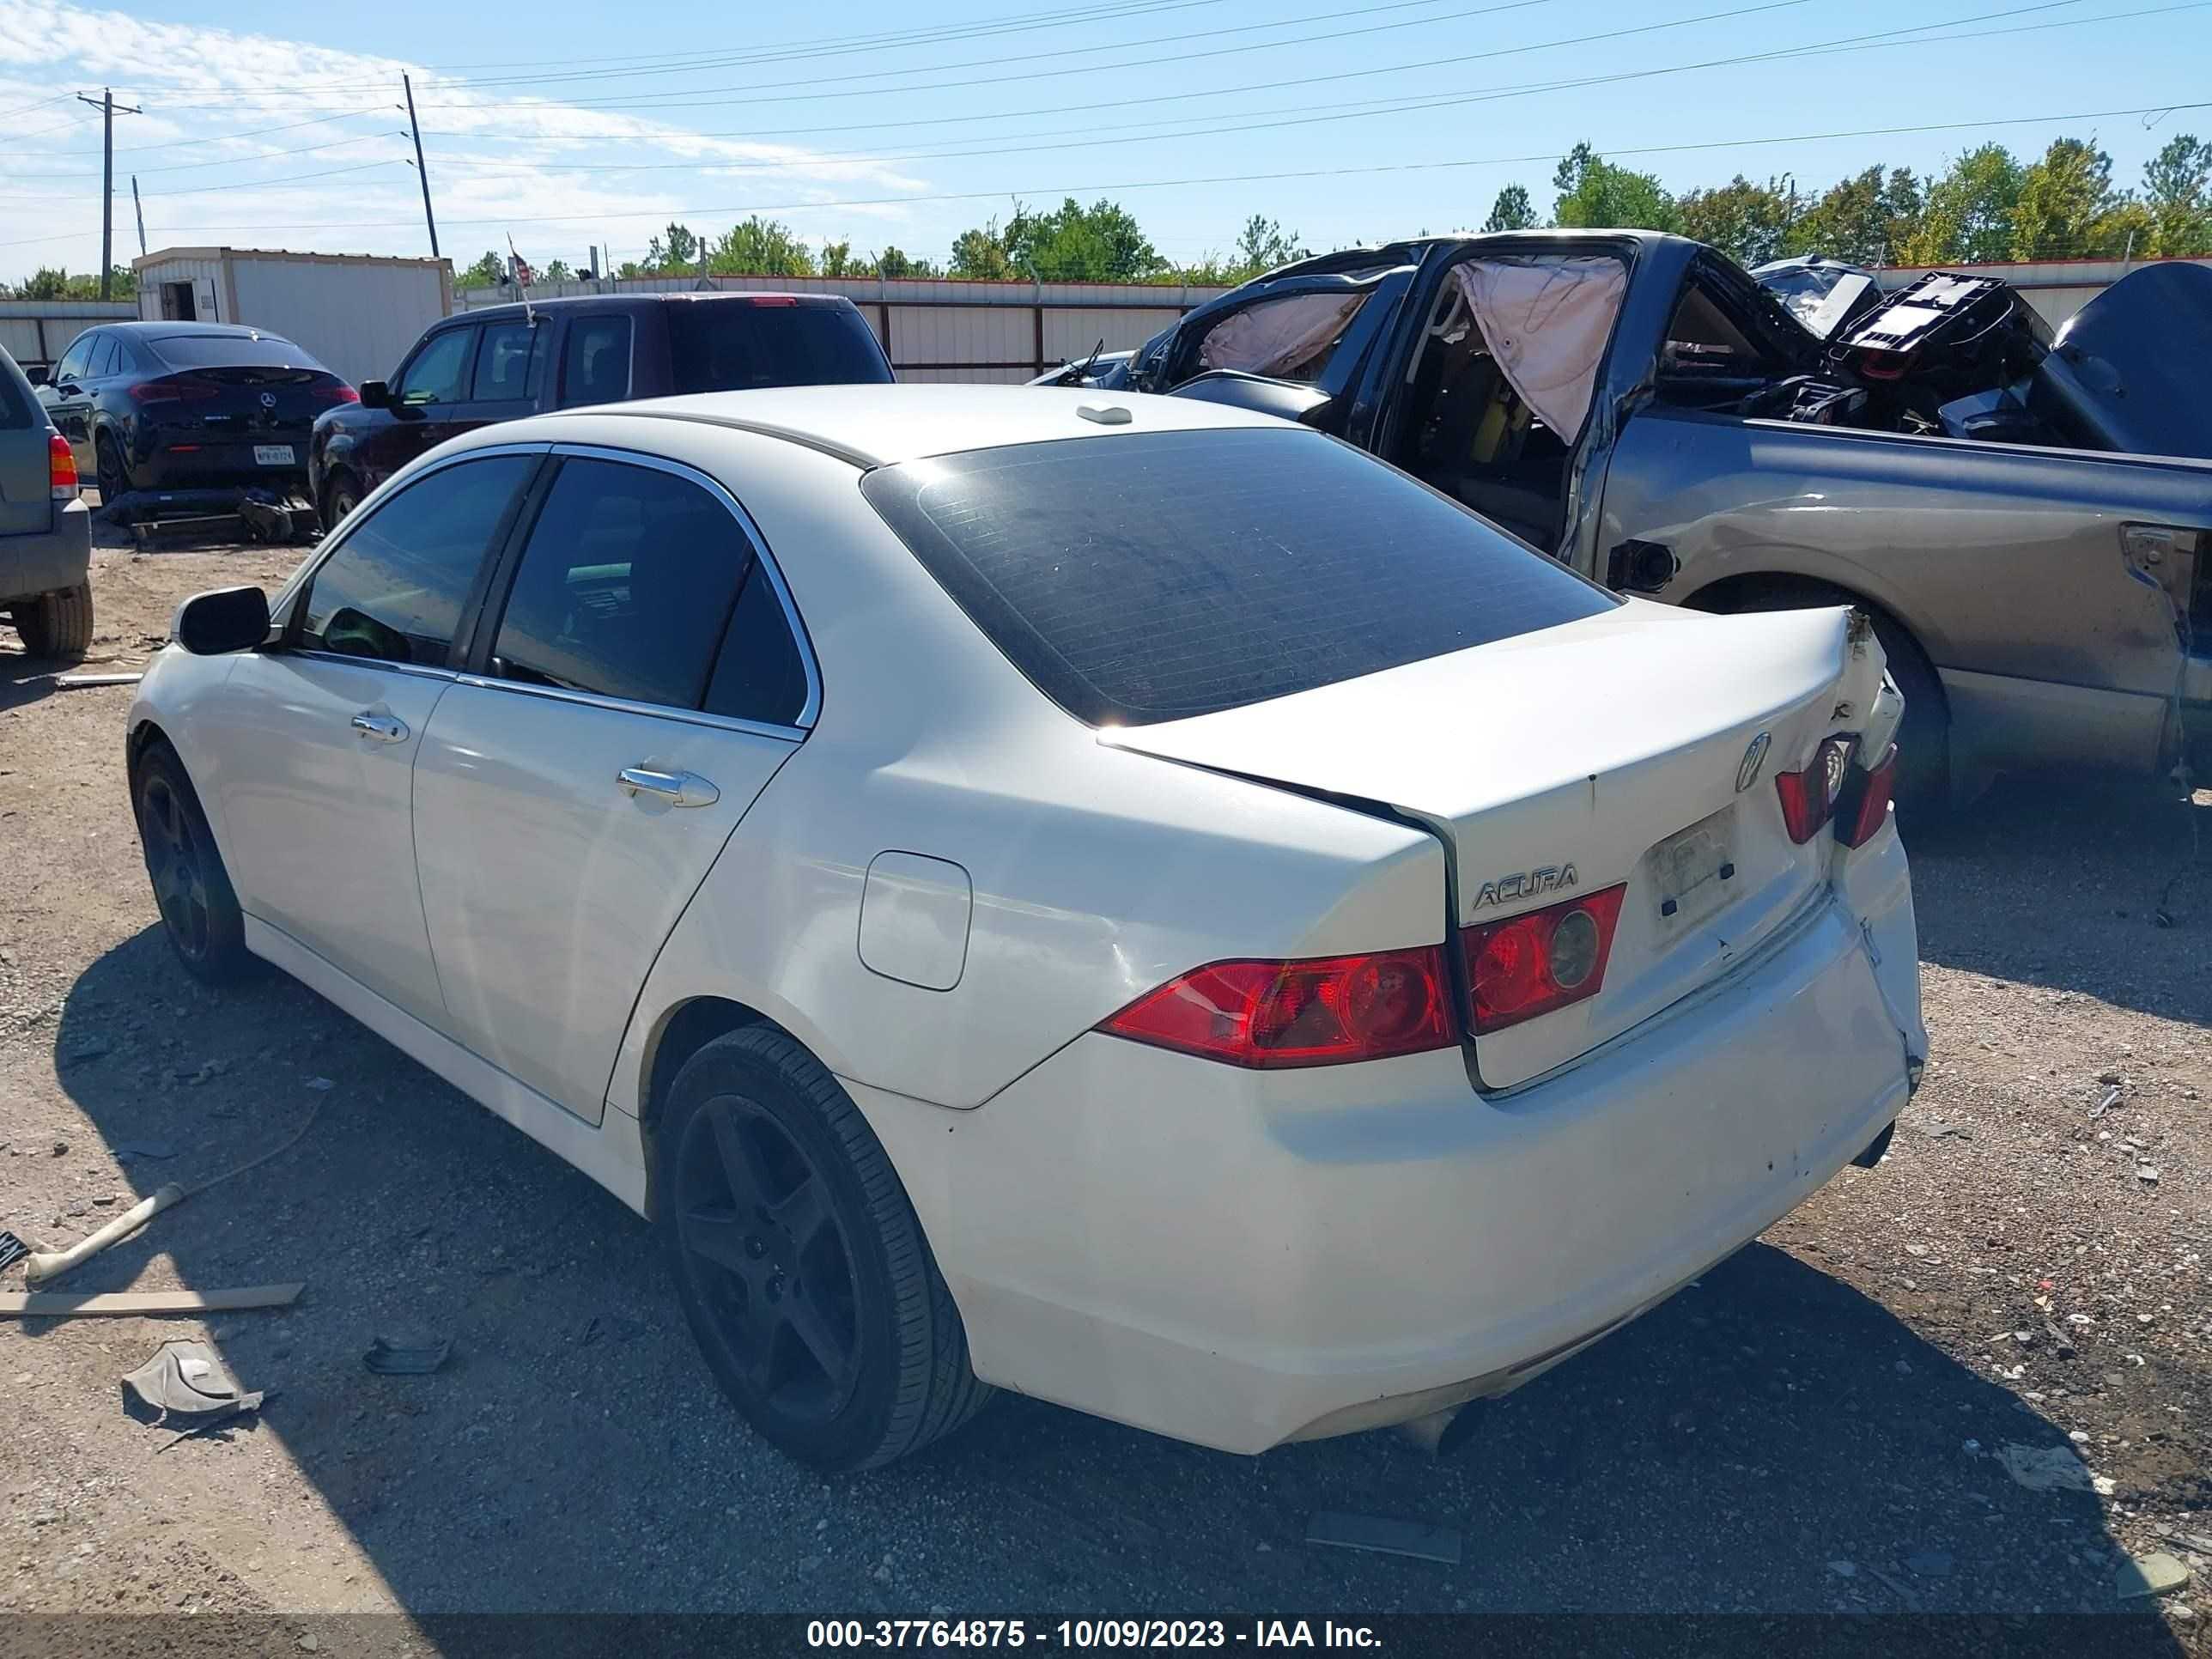 JH4CL96966C032424  - ACURA TSX  2006 IMG - 2